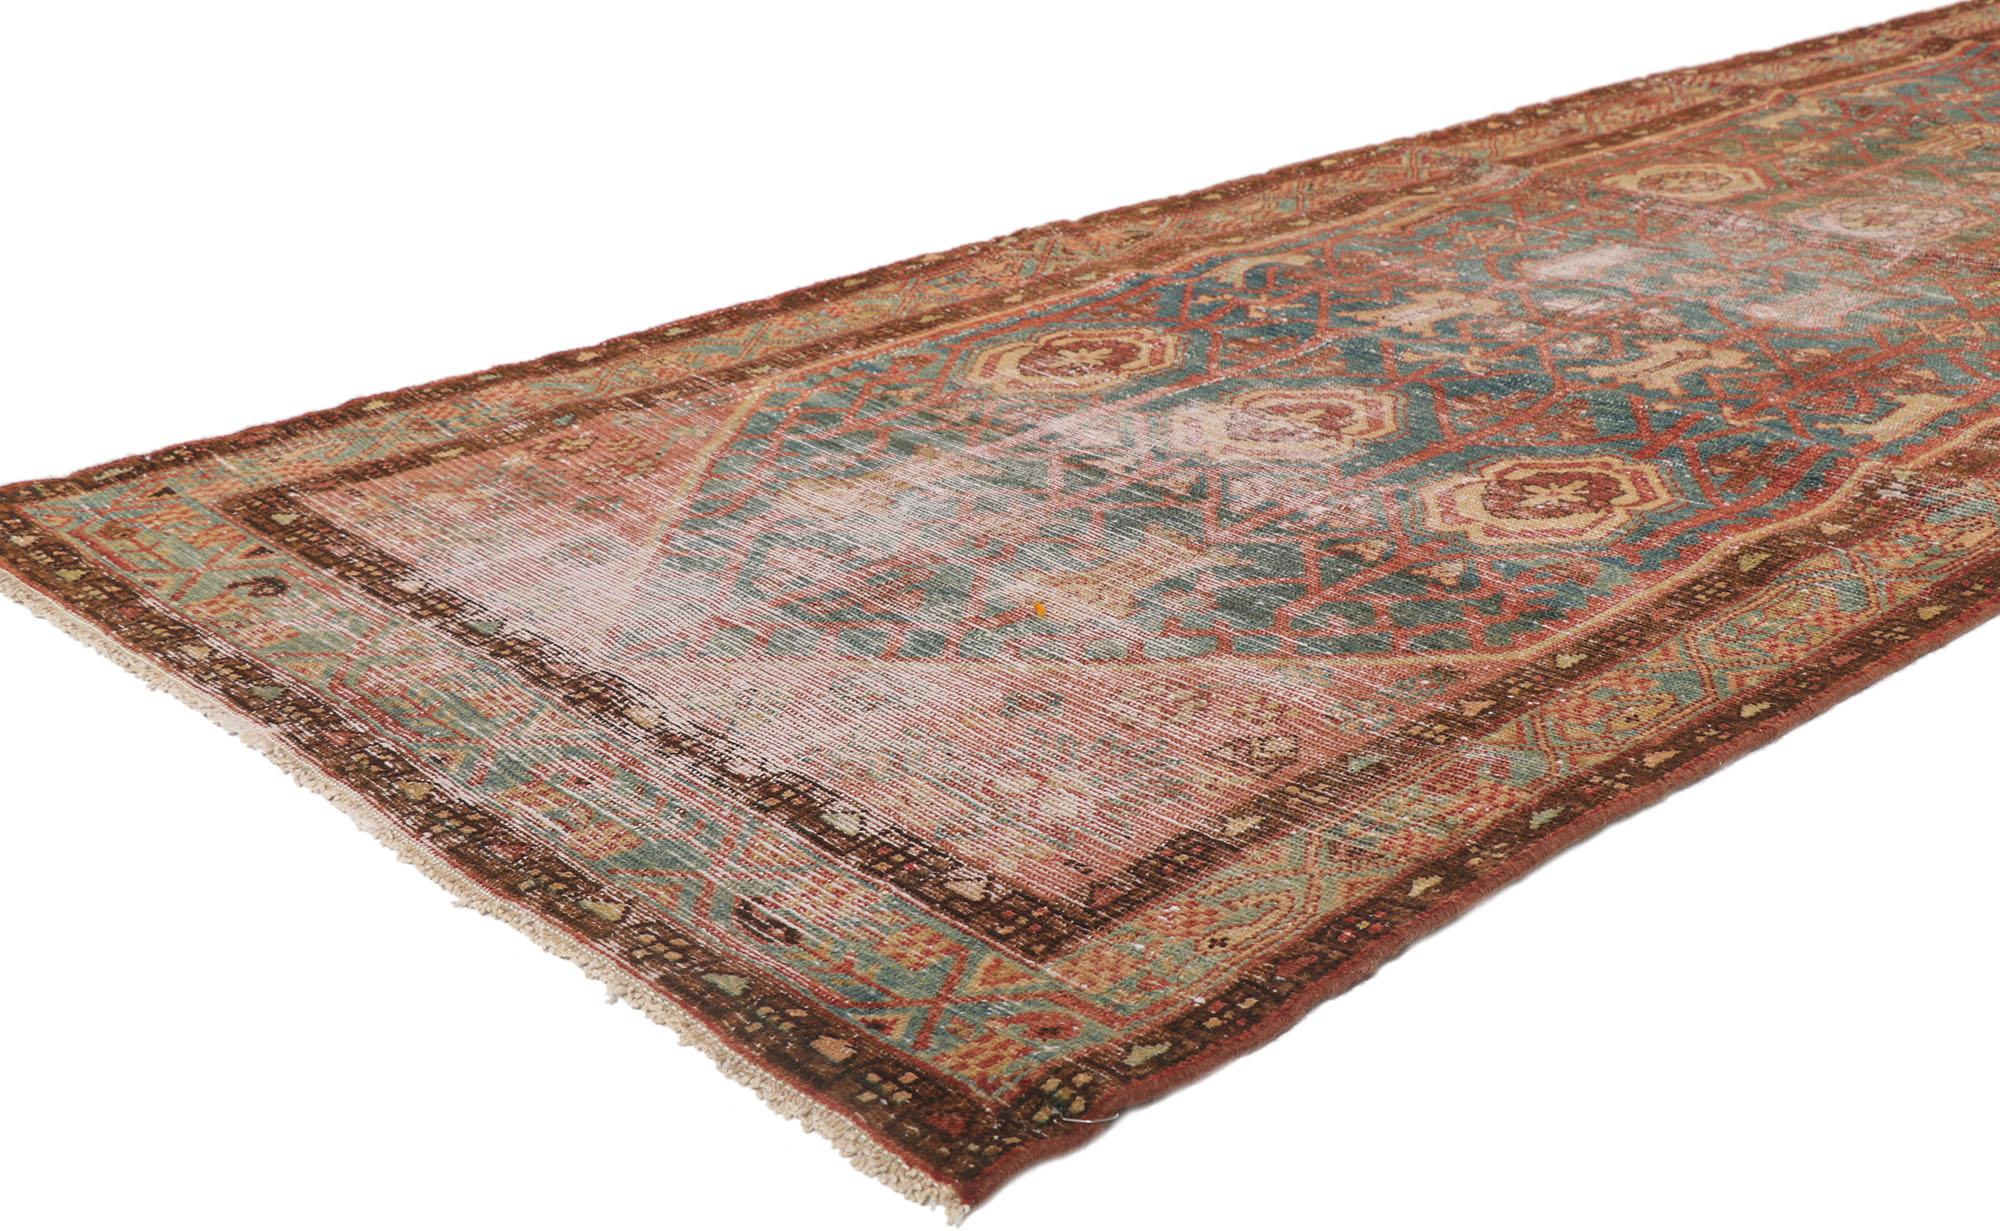 53730 Distressed Antique Persian Malayer Runner 03'05 x 13'04. With its rugged beauty and timeless design, this hand knotted wool distressed antique Persian Malayer carpet runner beautifully embodies a modern style. The lovingly time-worn bluish